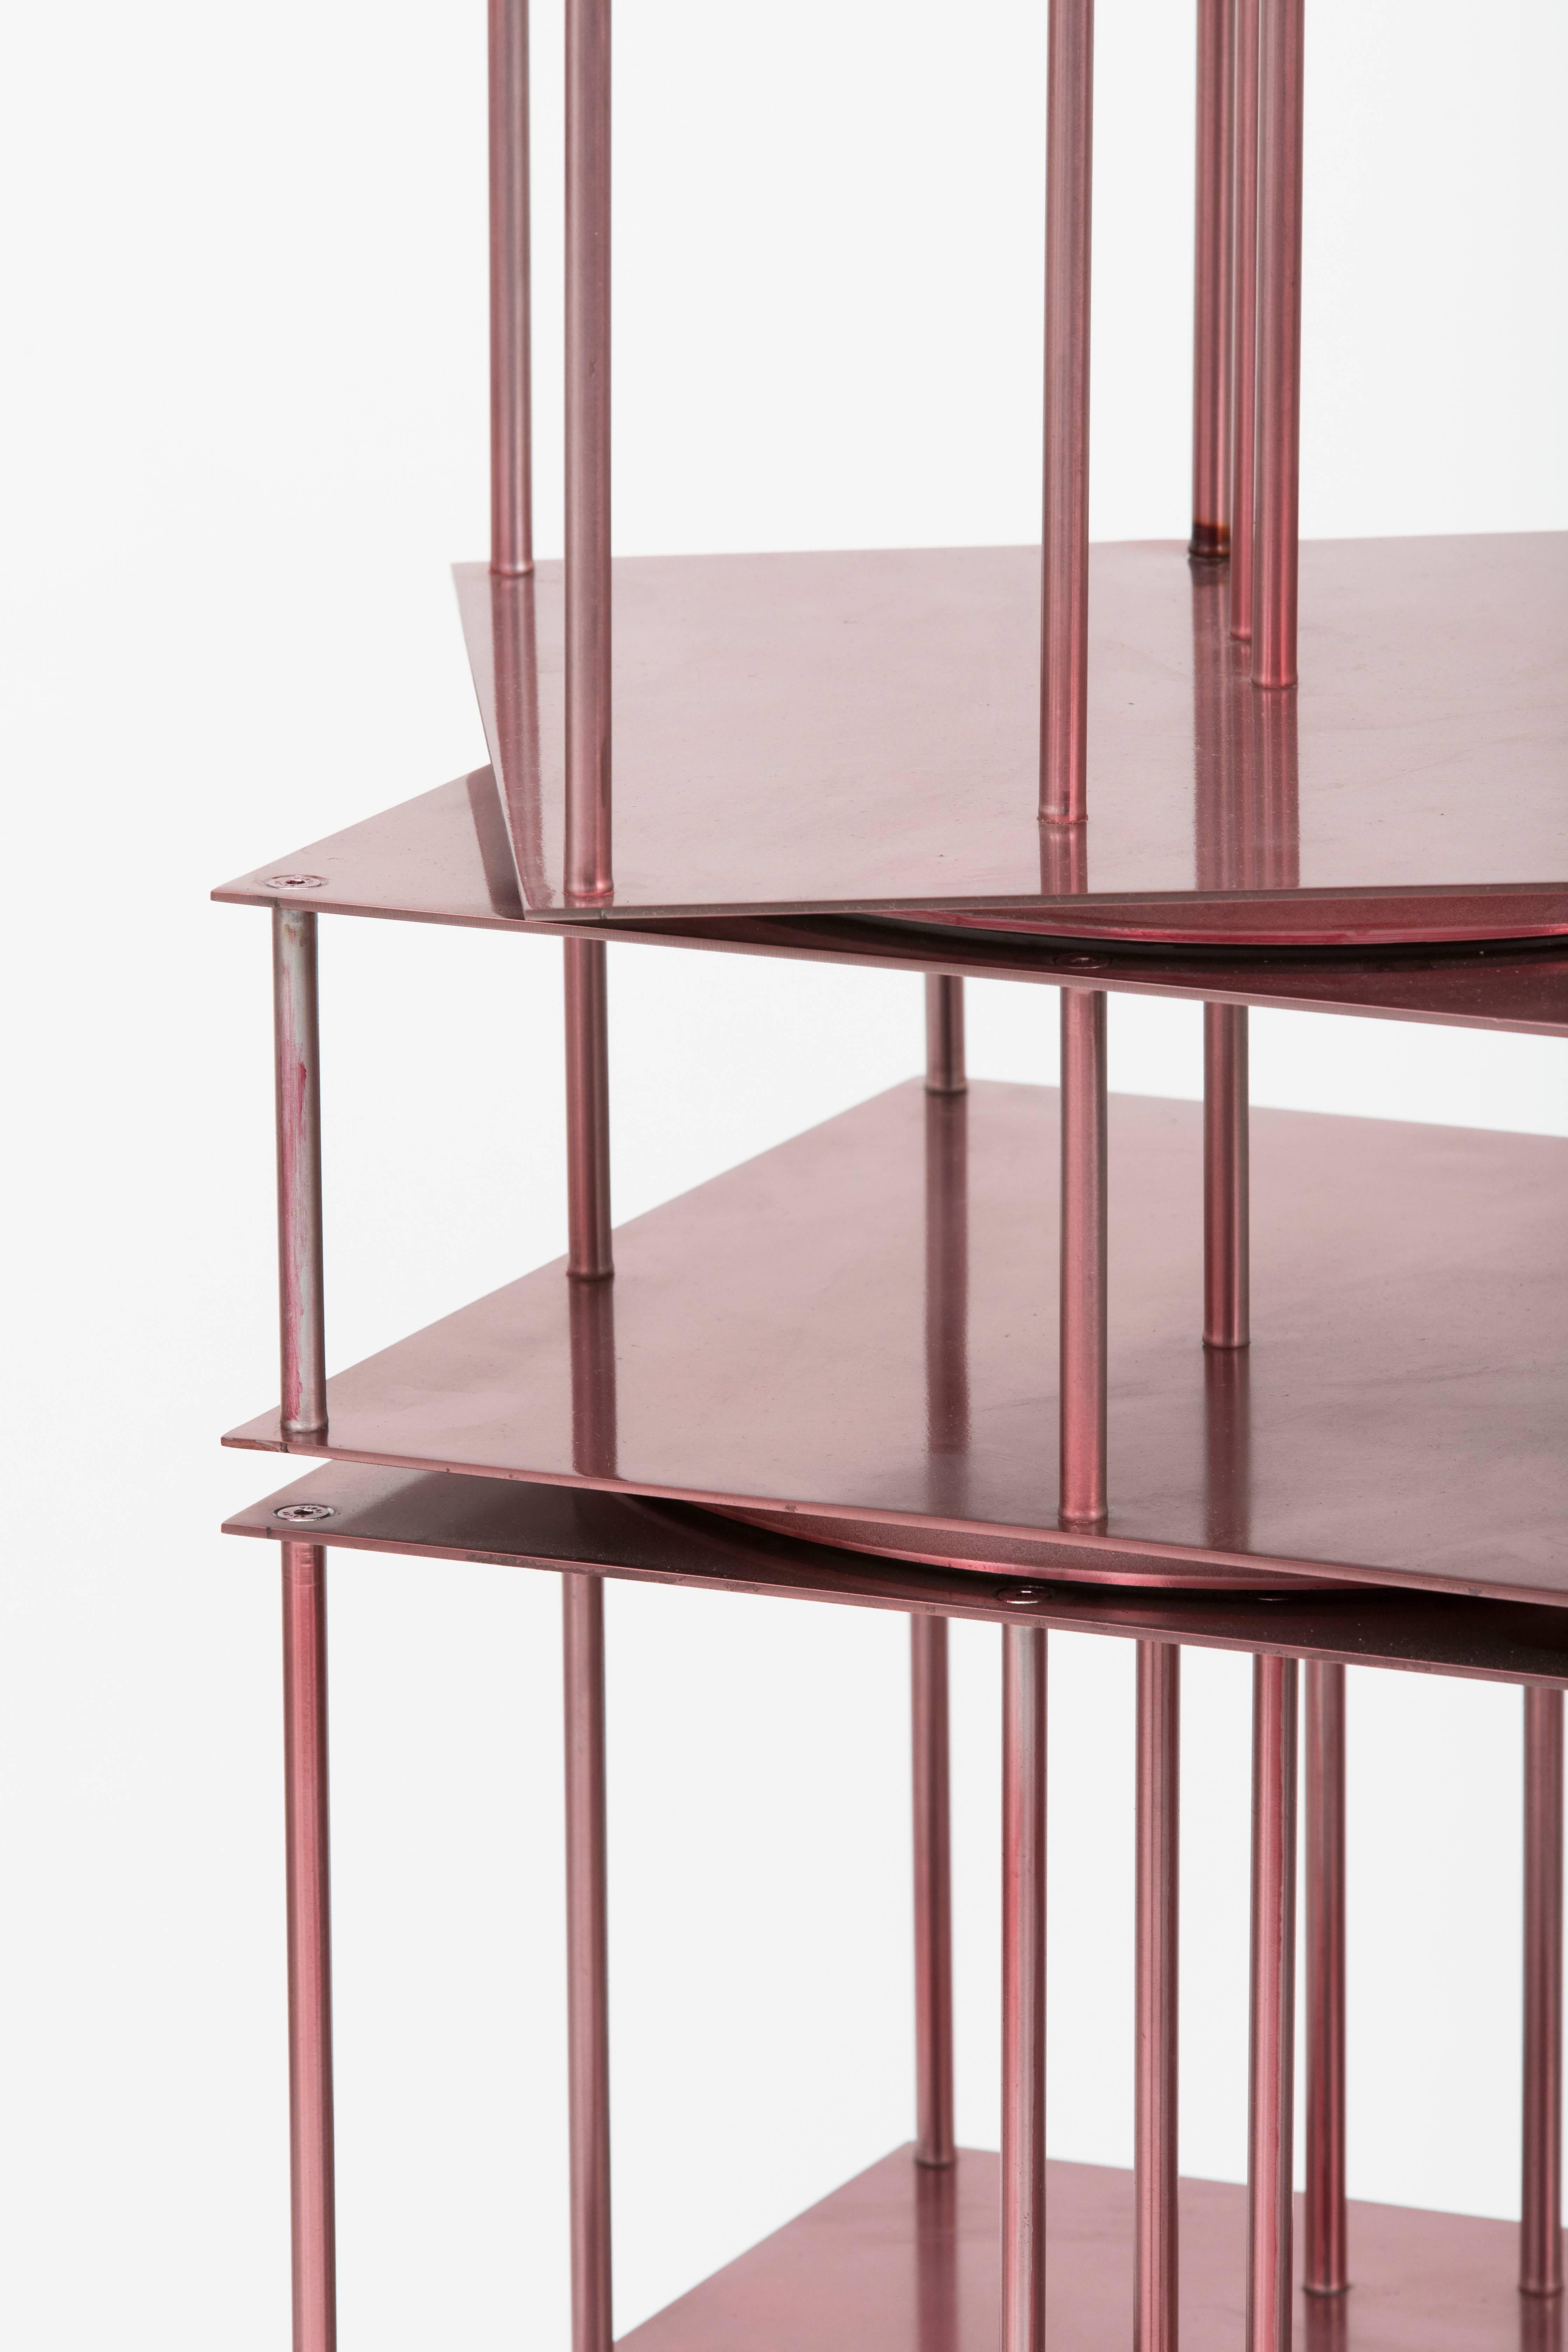 Not So General Gallery in Los Angeles is proud to present the Crosby library/ bookshelf / bookcase which is part of Crosby Studios' second collection of furniture entitled simply Collection II.

In Collection II, Crosby studios' founder Harry Nuriev